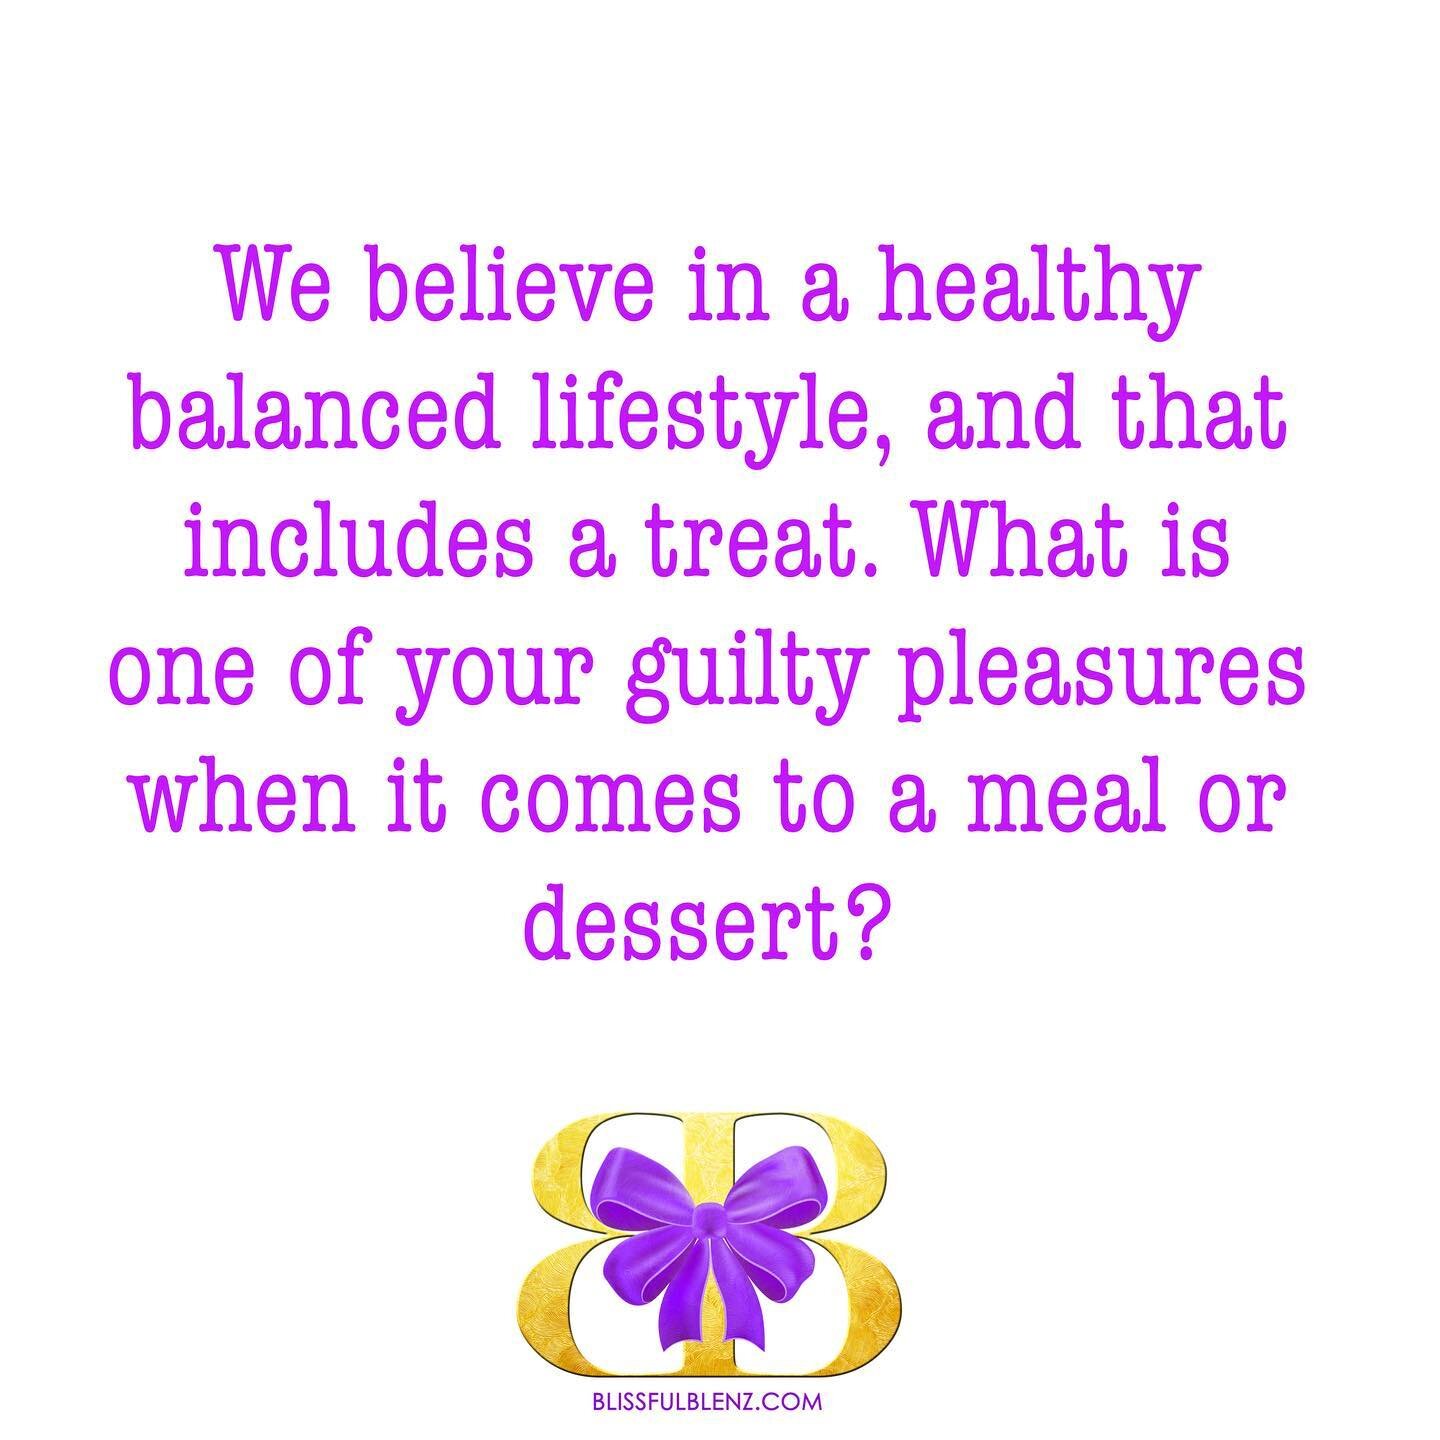 Let us know in the comments your guilty food or dessert pleasures? How often do you treat yourself? 🍭
.
.
.
.
.